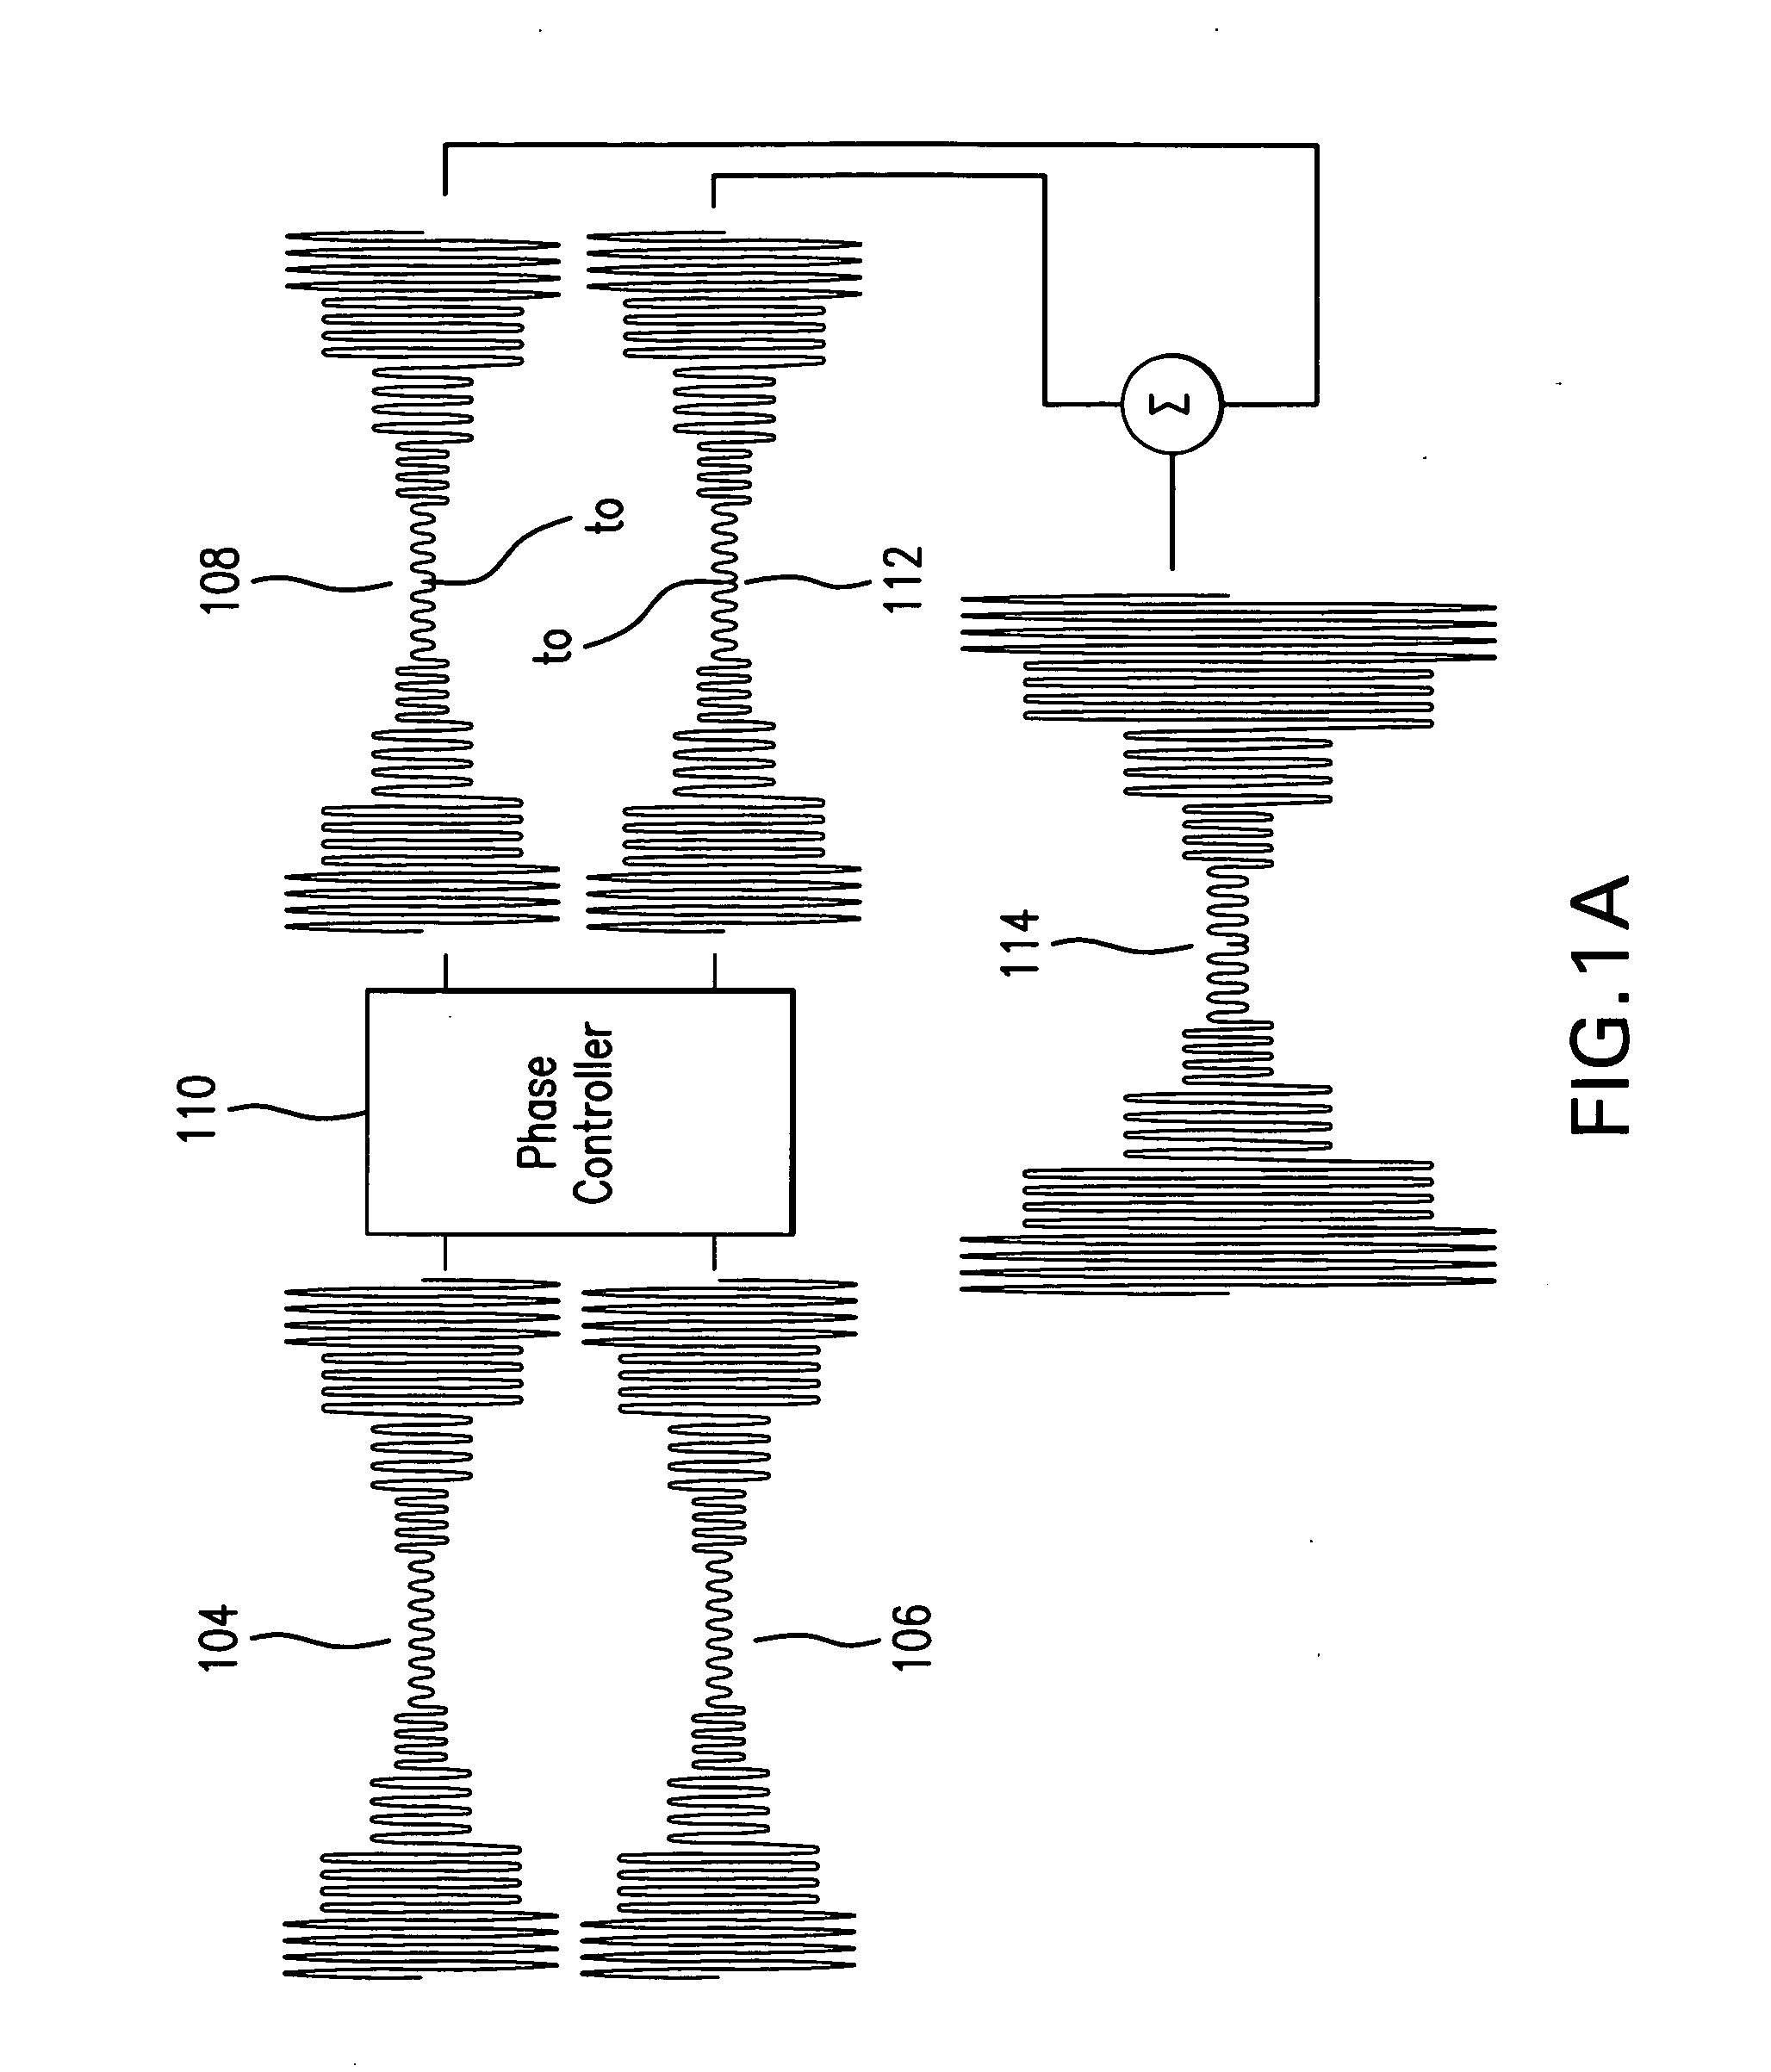 Systems and methods of RF tower transmission, modulation, and amplification, including embodiments for compensating for waveform distortion